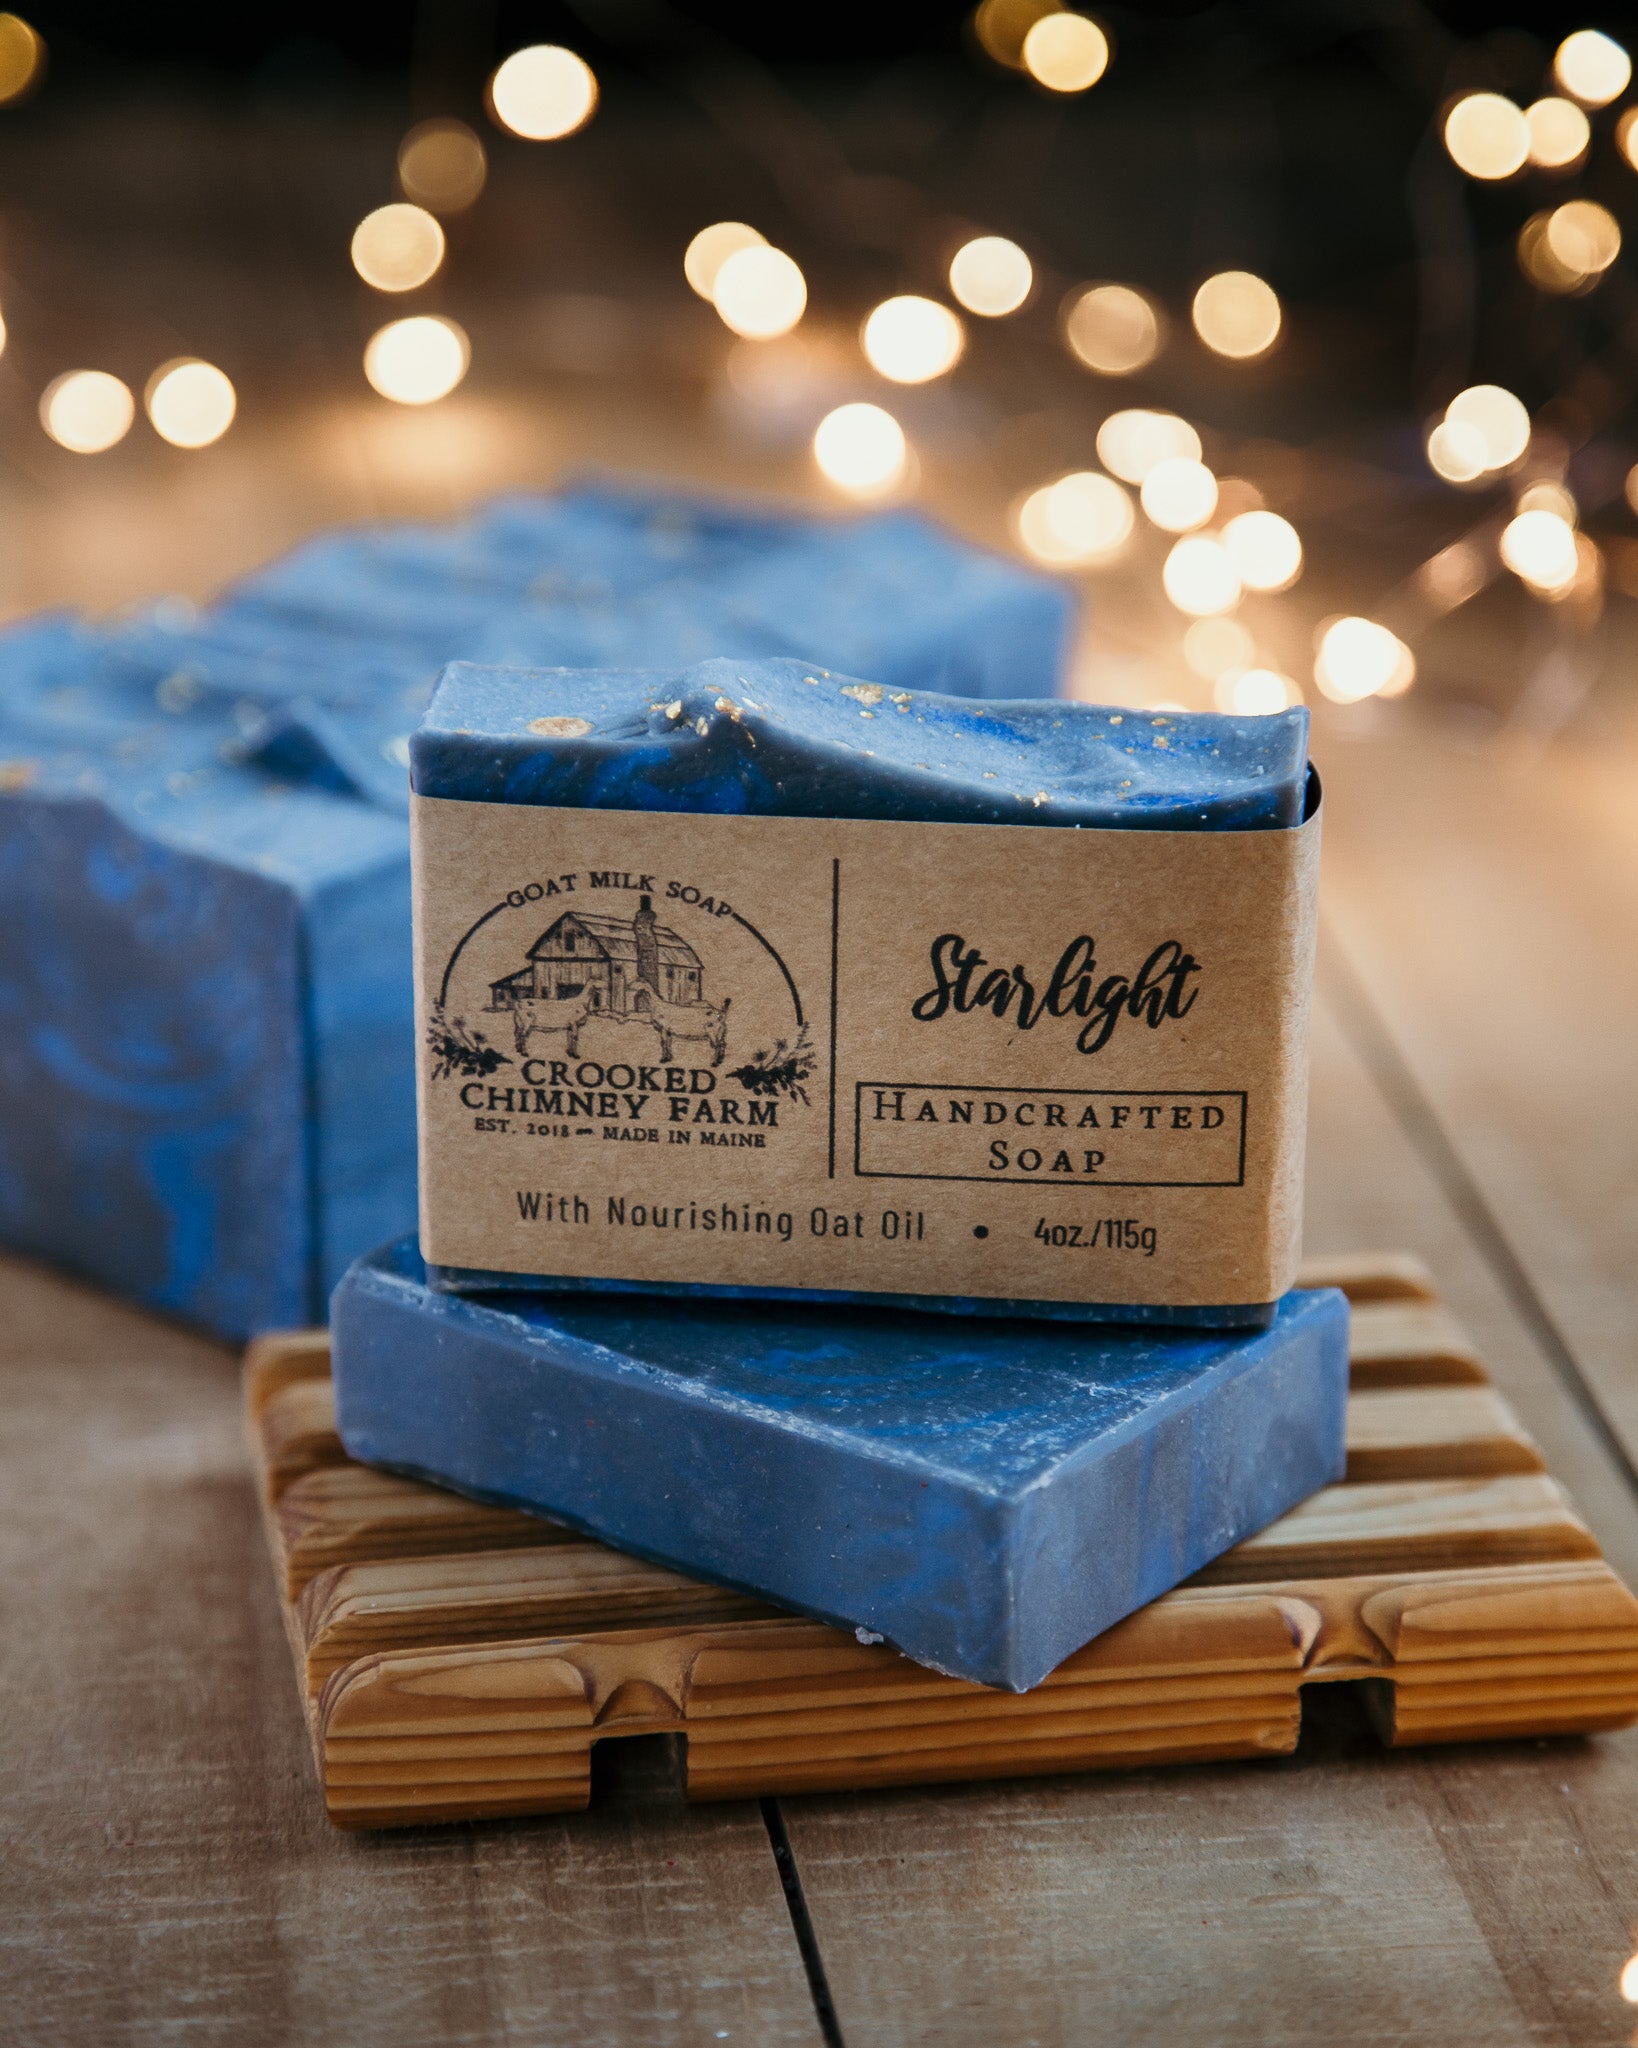 Starlight bar soap on soap deck with more soap and twinkle lights in the background